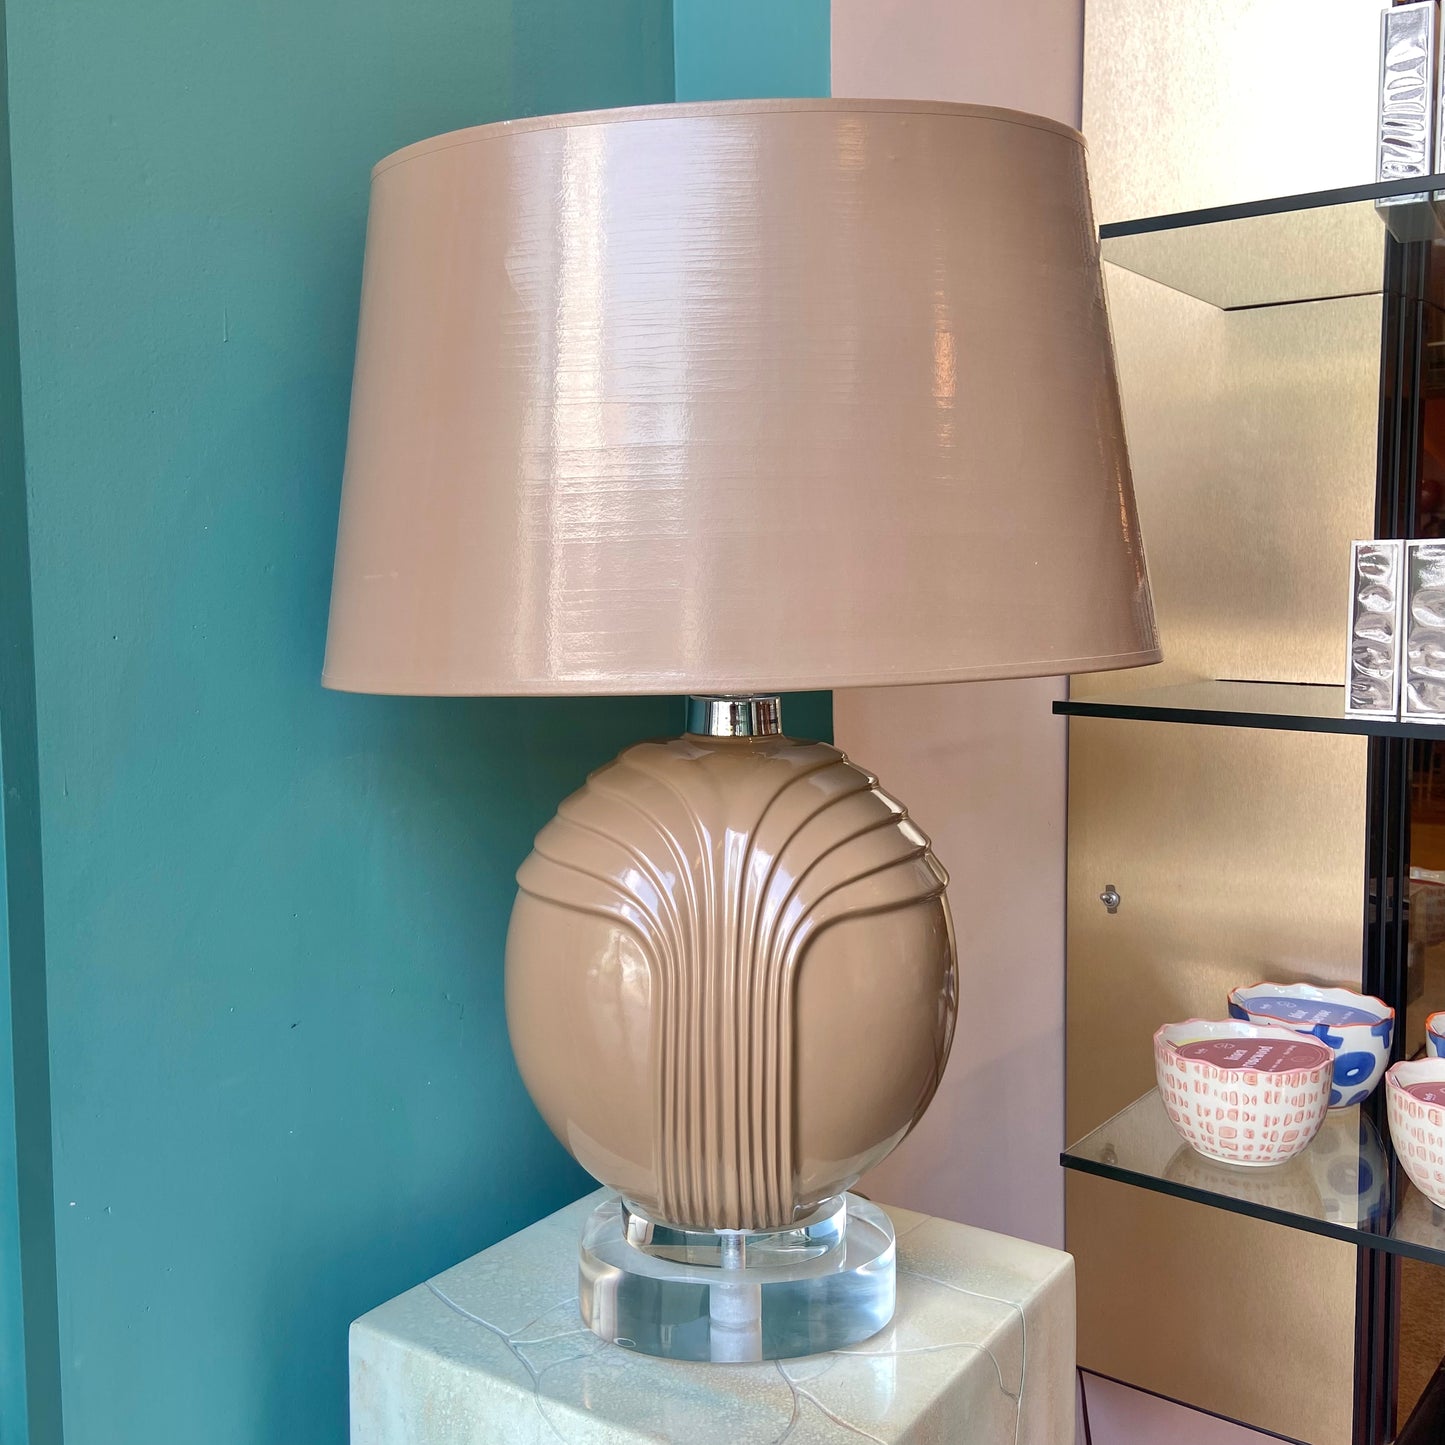 Vintage Art Deco Style Taupe Ceramic and Lucite Table Lamp